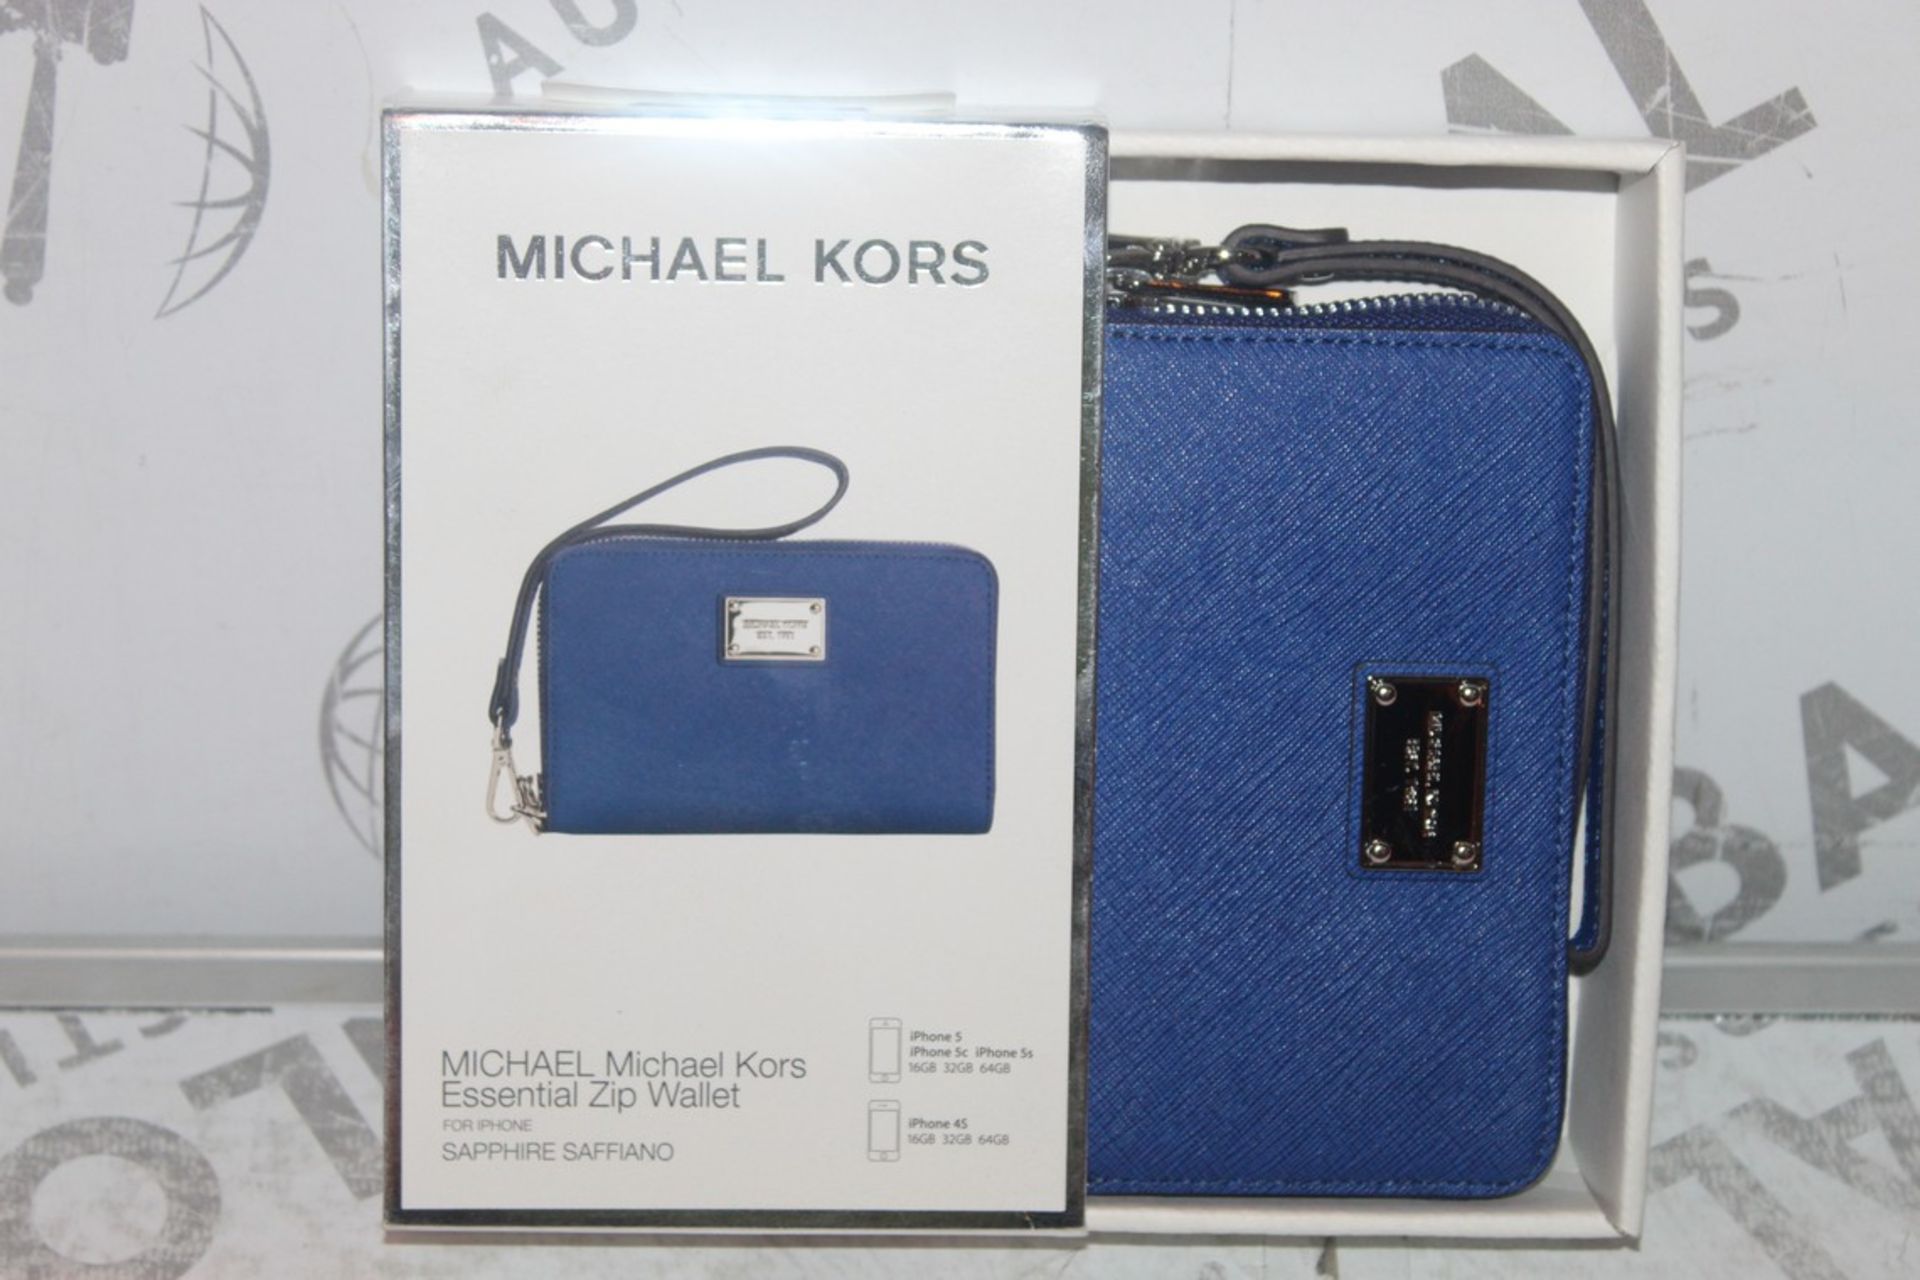 Lot to Contain 2 Michael Kors Essential Zip Wallets with Phone Compartment Combined RRP £60